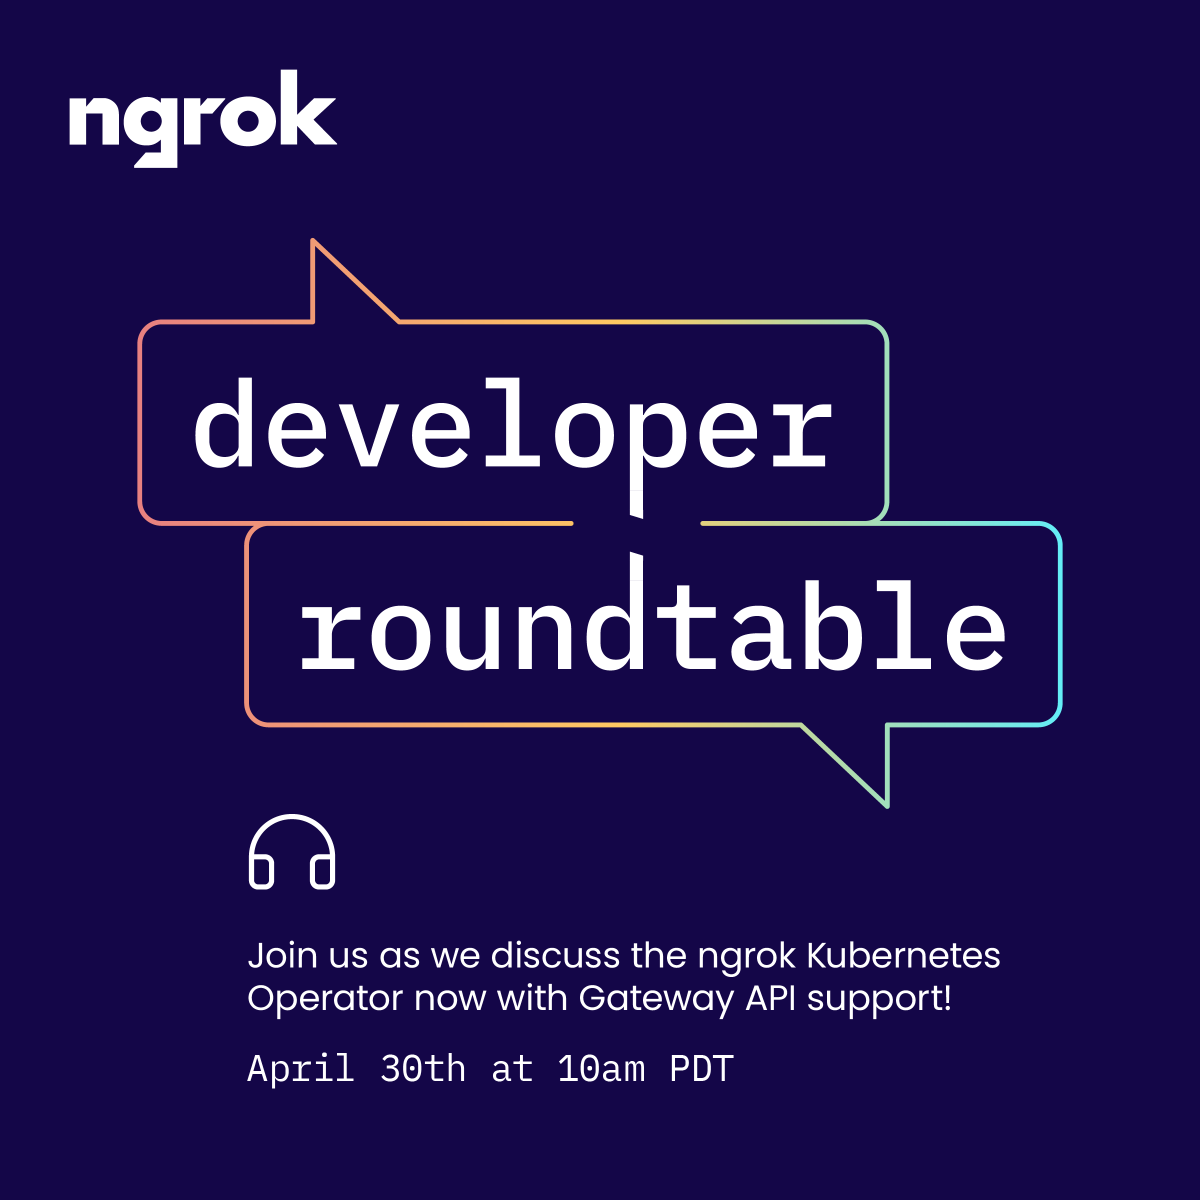 🗓️ Join us on Tuesday, April 30th at 10AM PT for our live Developer Roundtable! 👥 @stmcallister & @realdealsalil will be demonstrating the recently updated ngrok Kubernetes Operator that now supports the Kubernetes Gateway API spec! ☑️ Register here: ow.ly/uHnU50RiH0F